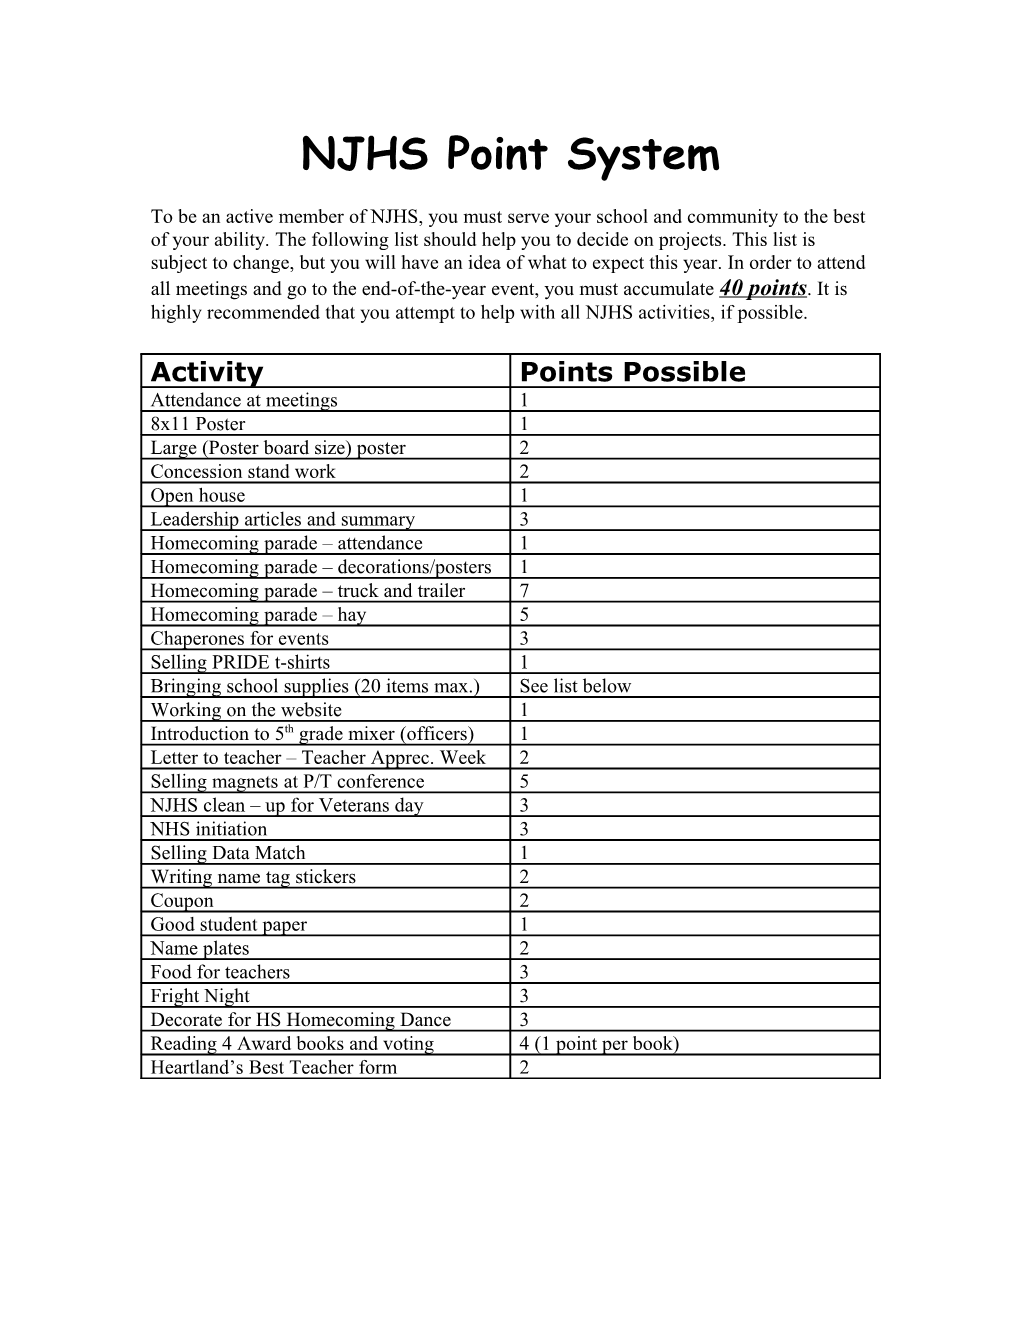 NJHS Point System